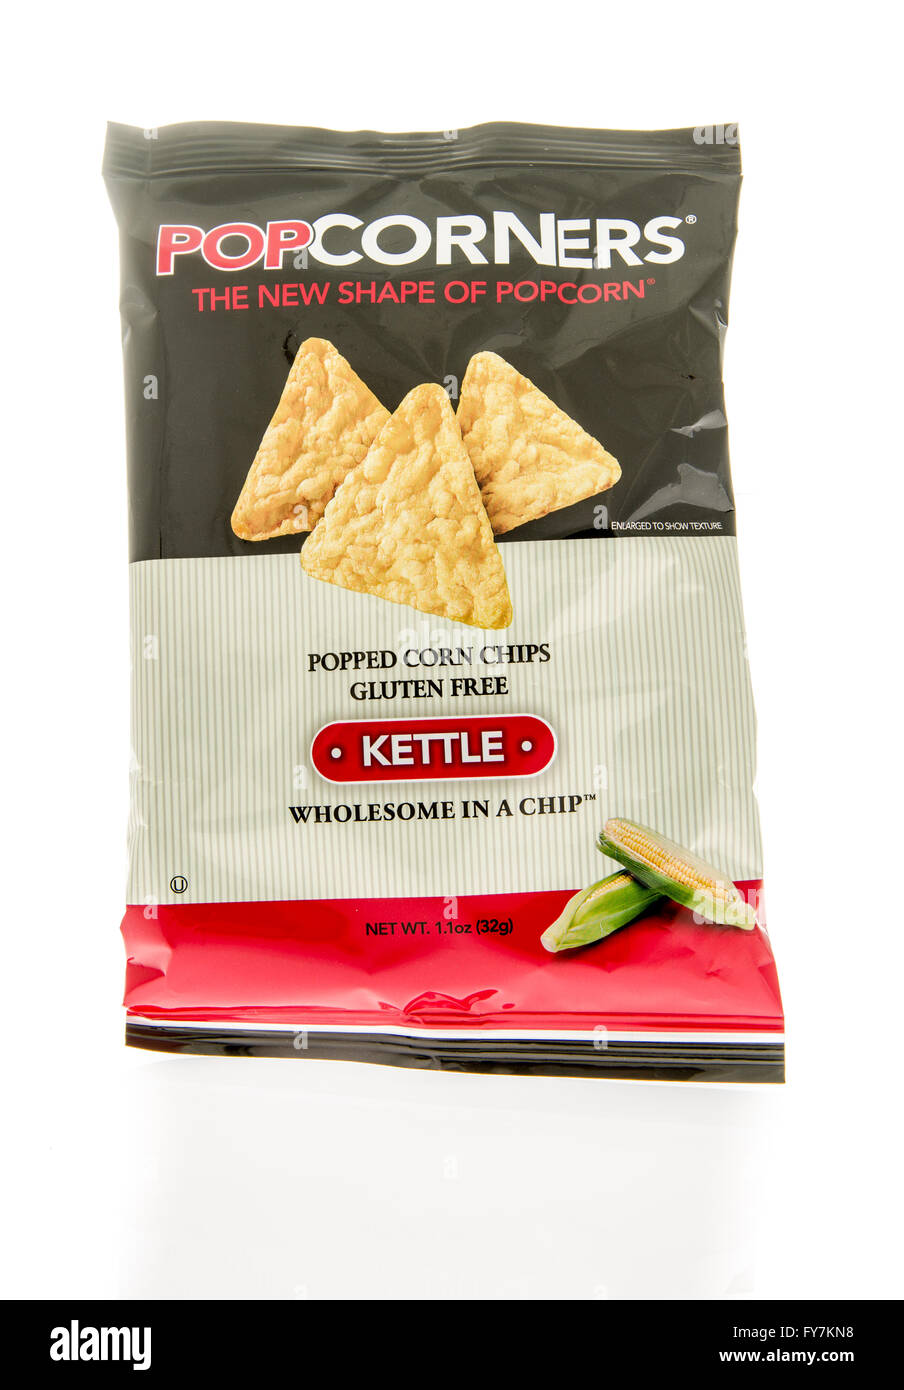 Winneconne, WI - 5 March 2016:  A bag of Popcorners chips in kettle flavor Stock Photo